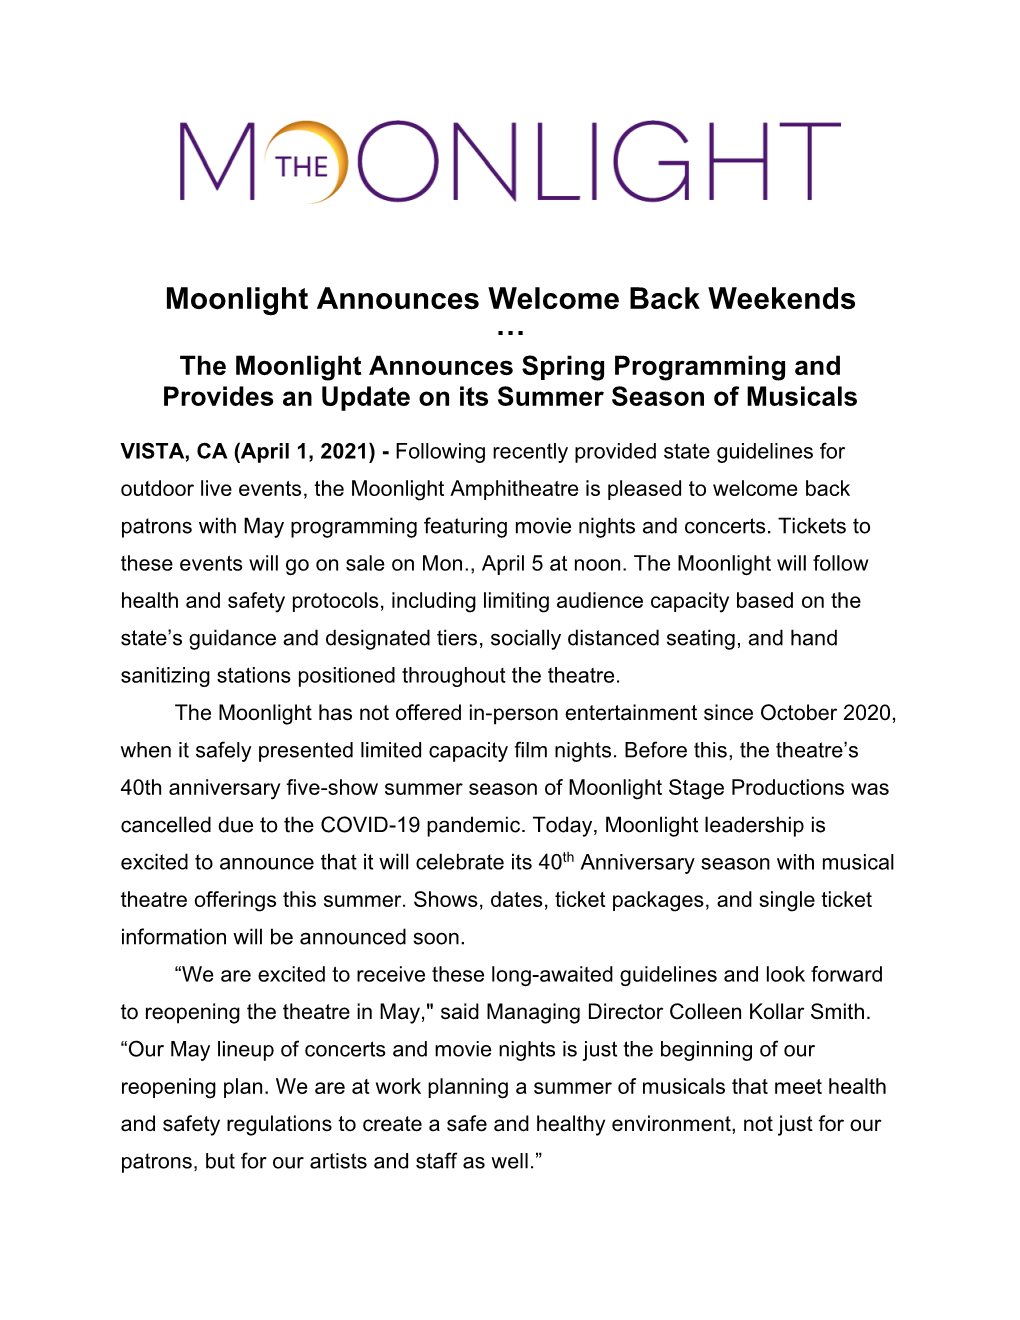 The Moonlight Announces May Reopening